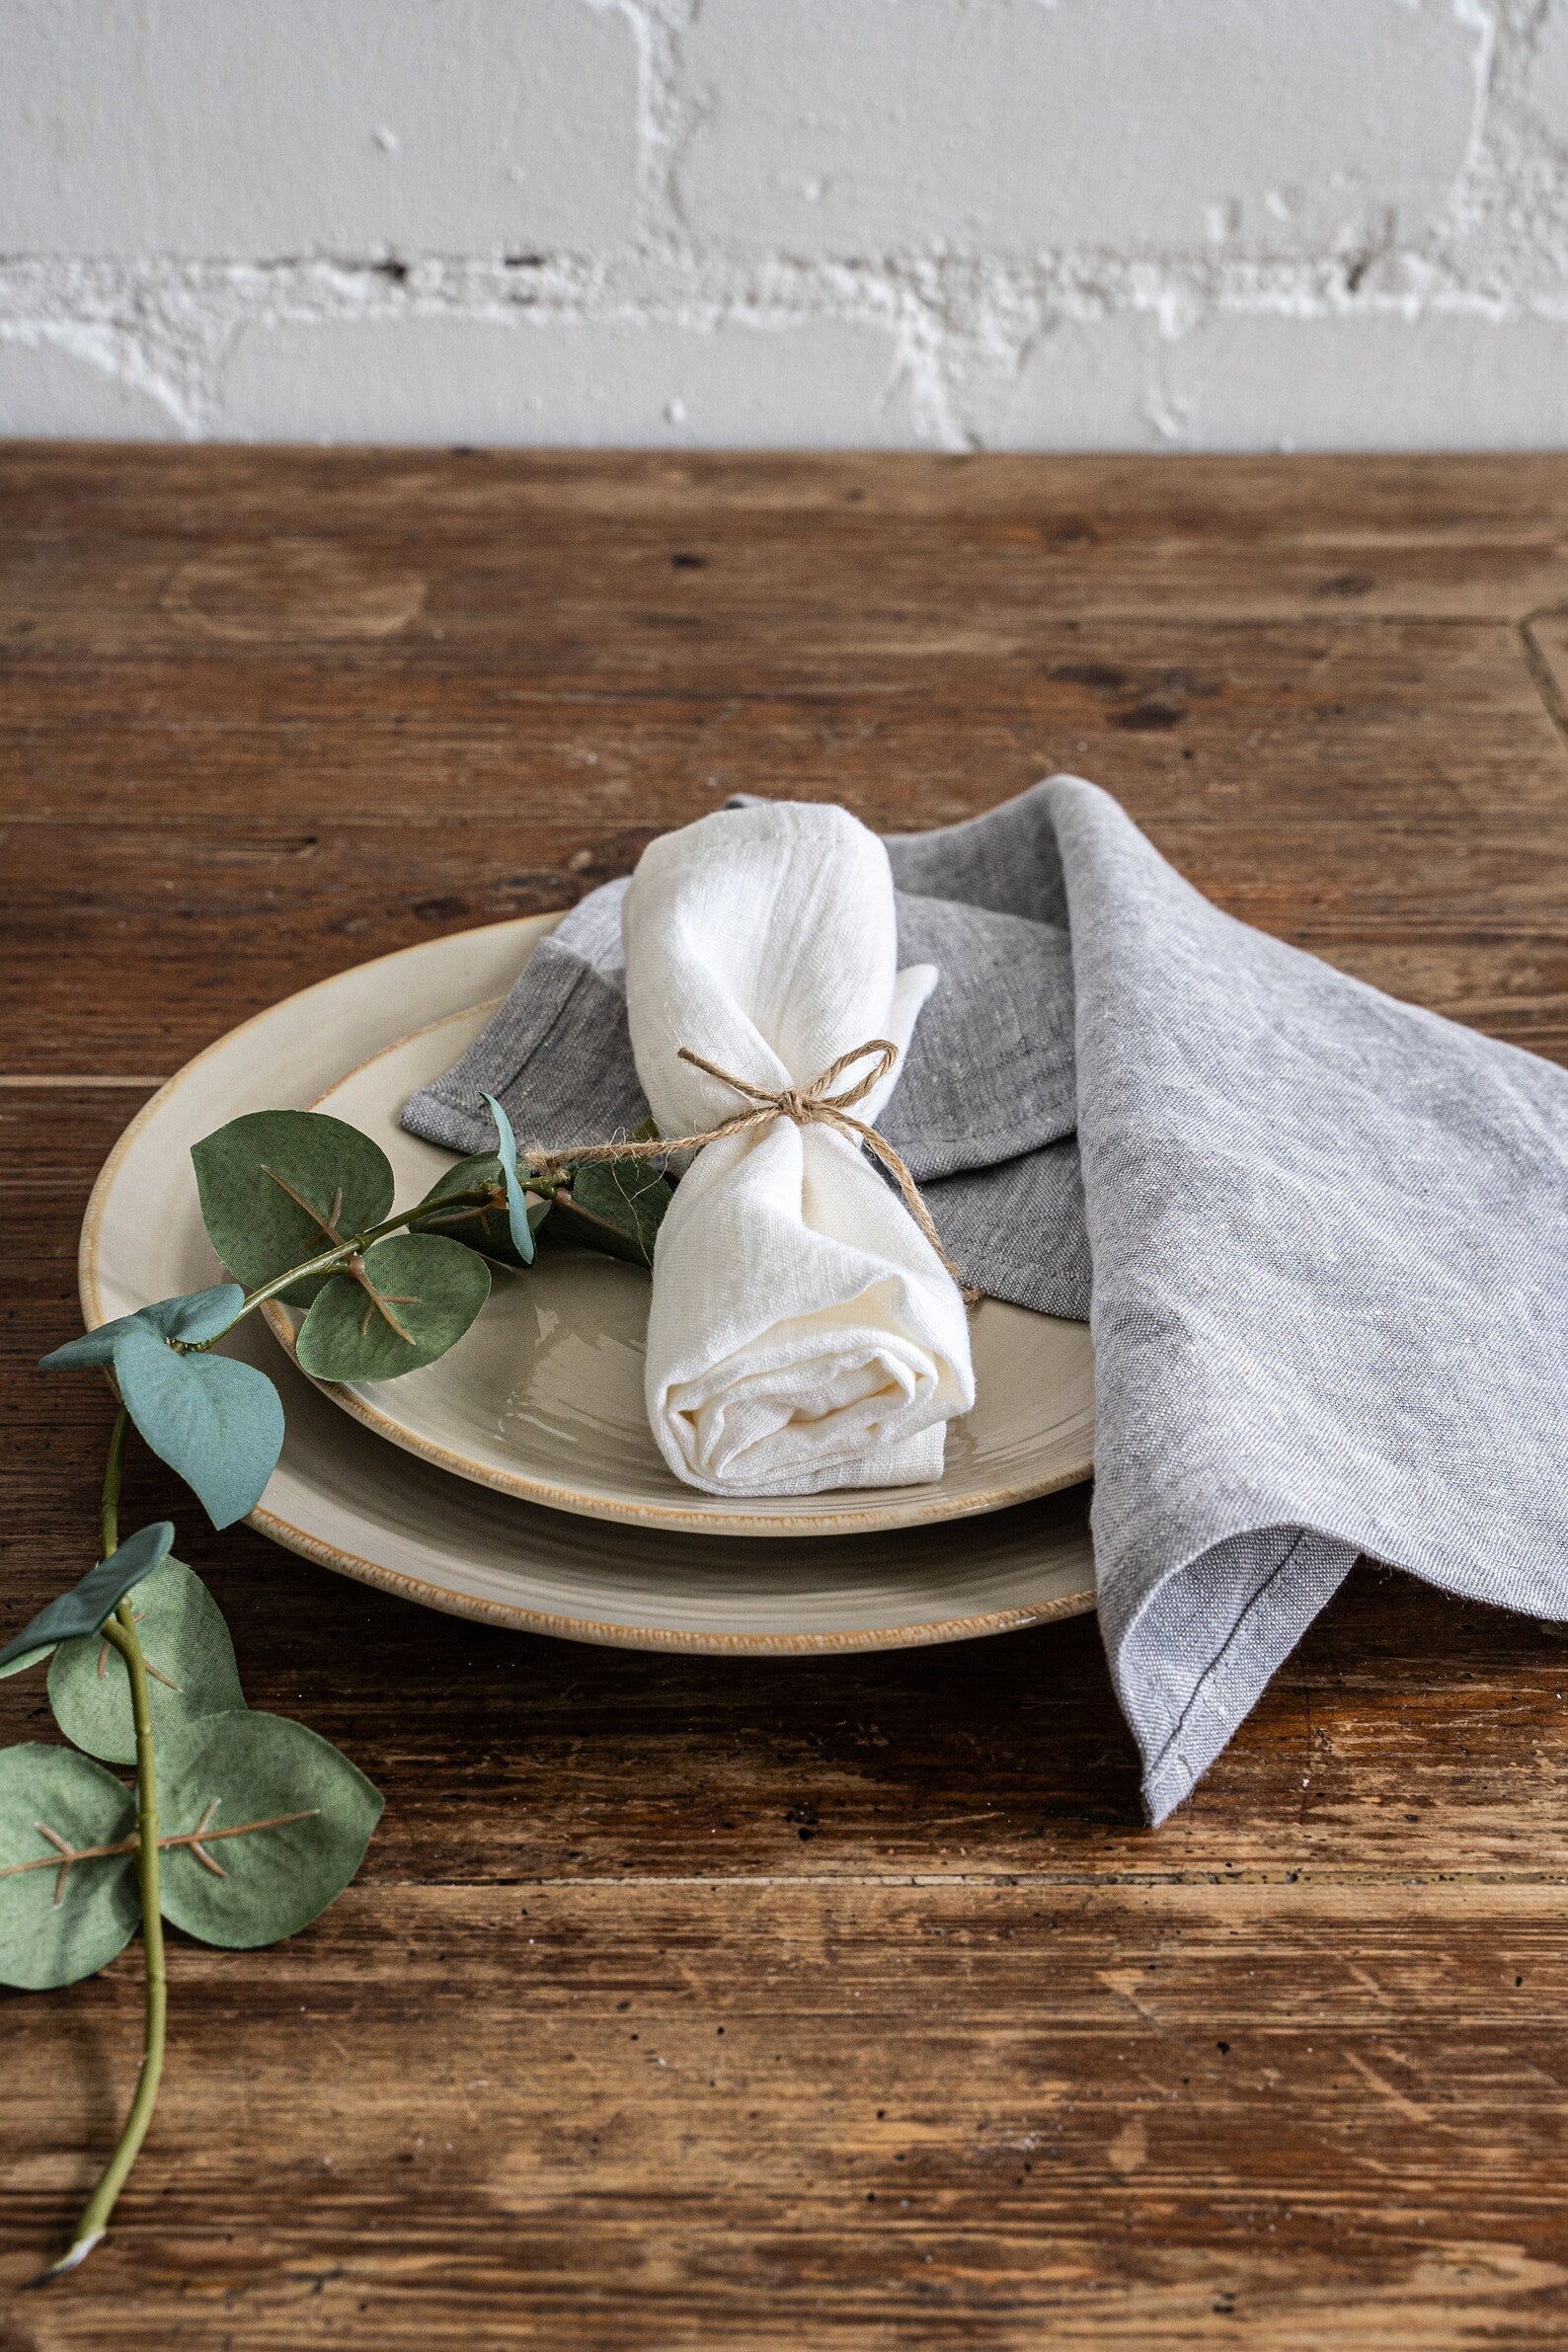 Linen napkins in Off WhiteWashed soft natural linen napkins set - beautiful and useful accessory to your kitchen. Our natural linen napkin clothes are perfect for lunch, dinner, a party, or wDusty Linen